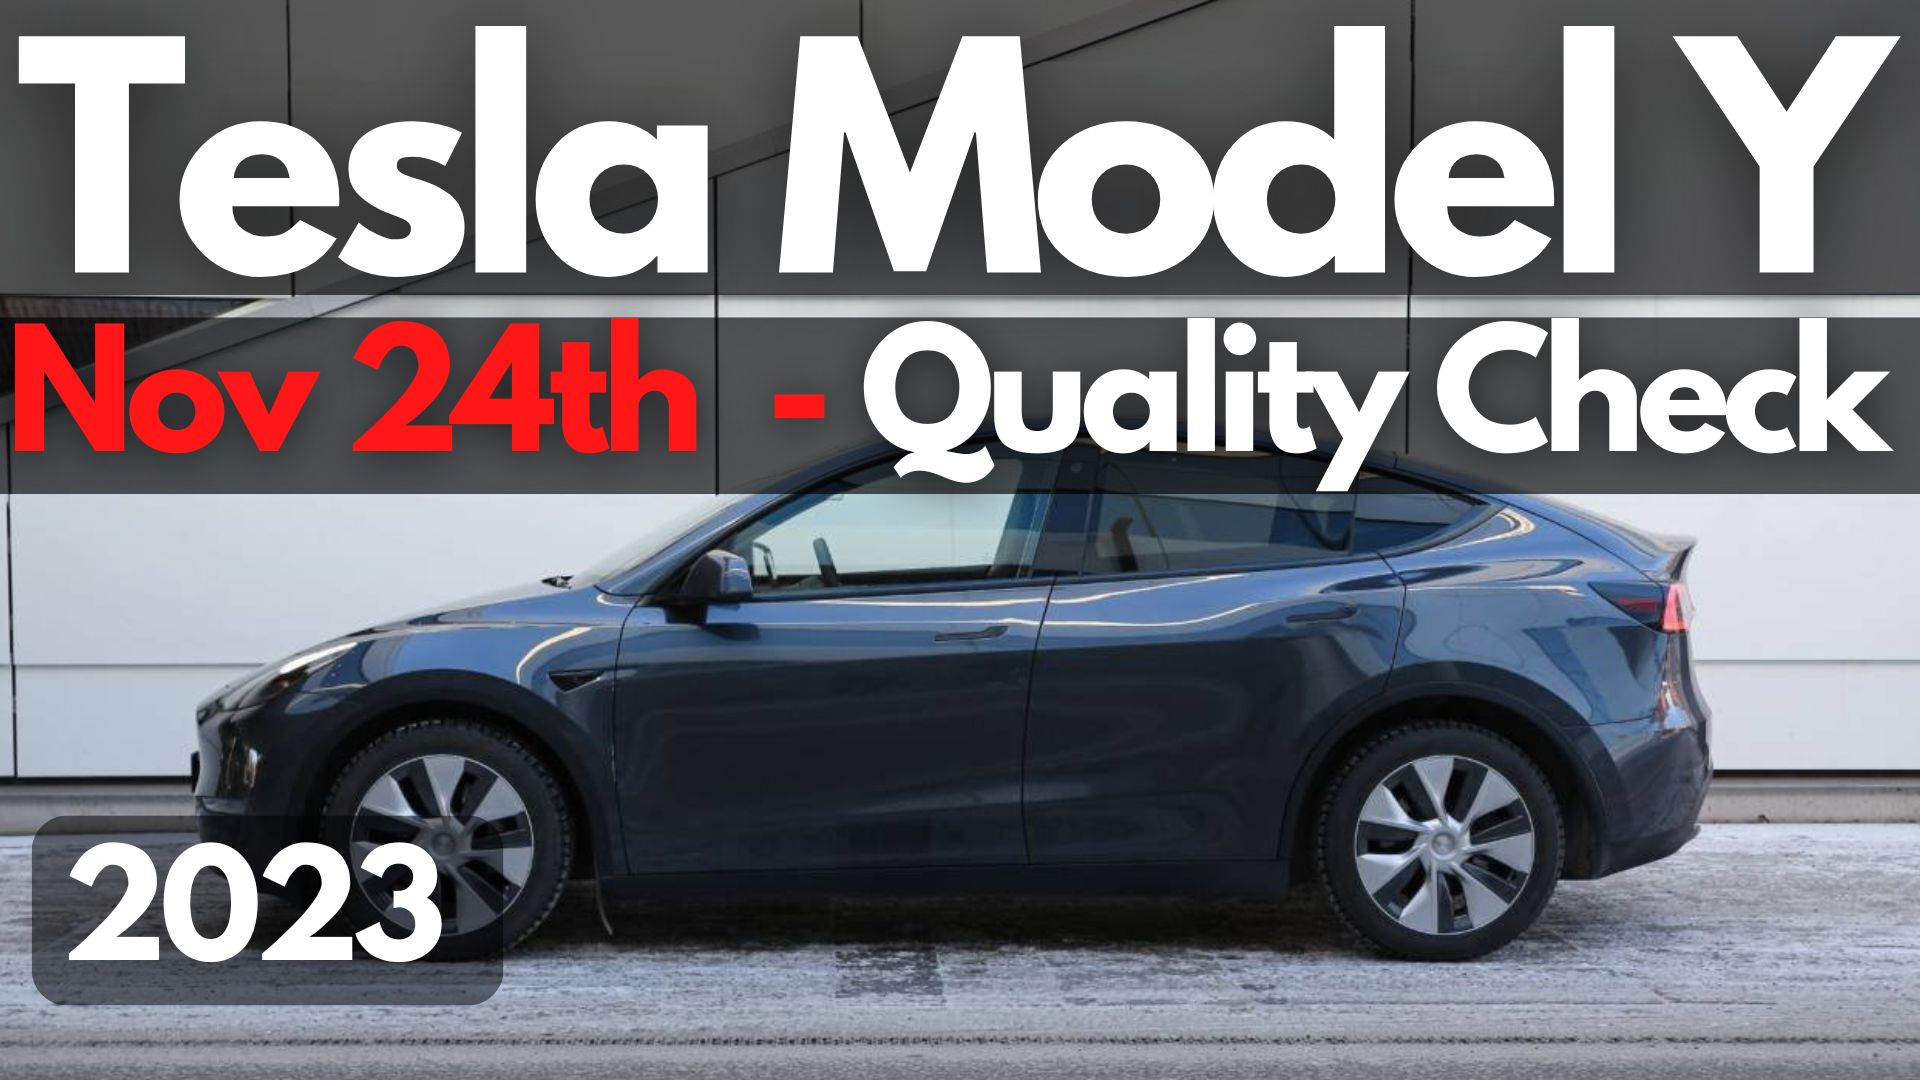 Has Tesla Improved The Model Y Build Quality For Nov 11th, 2023?